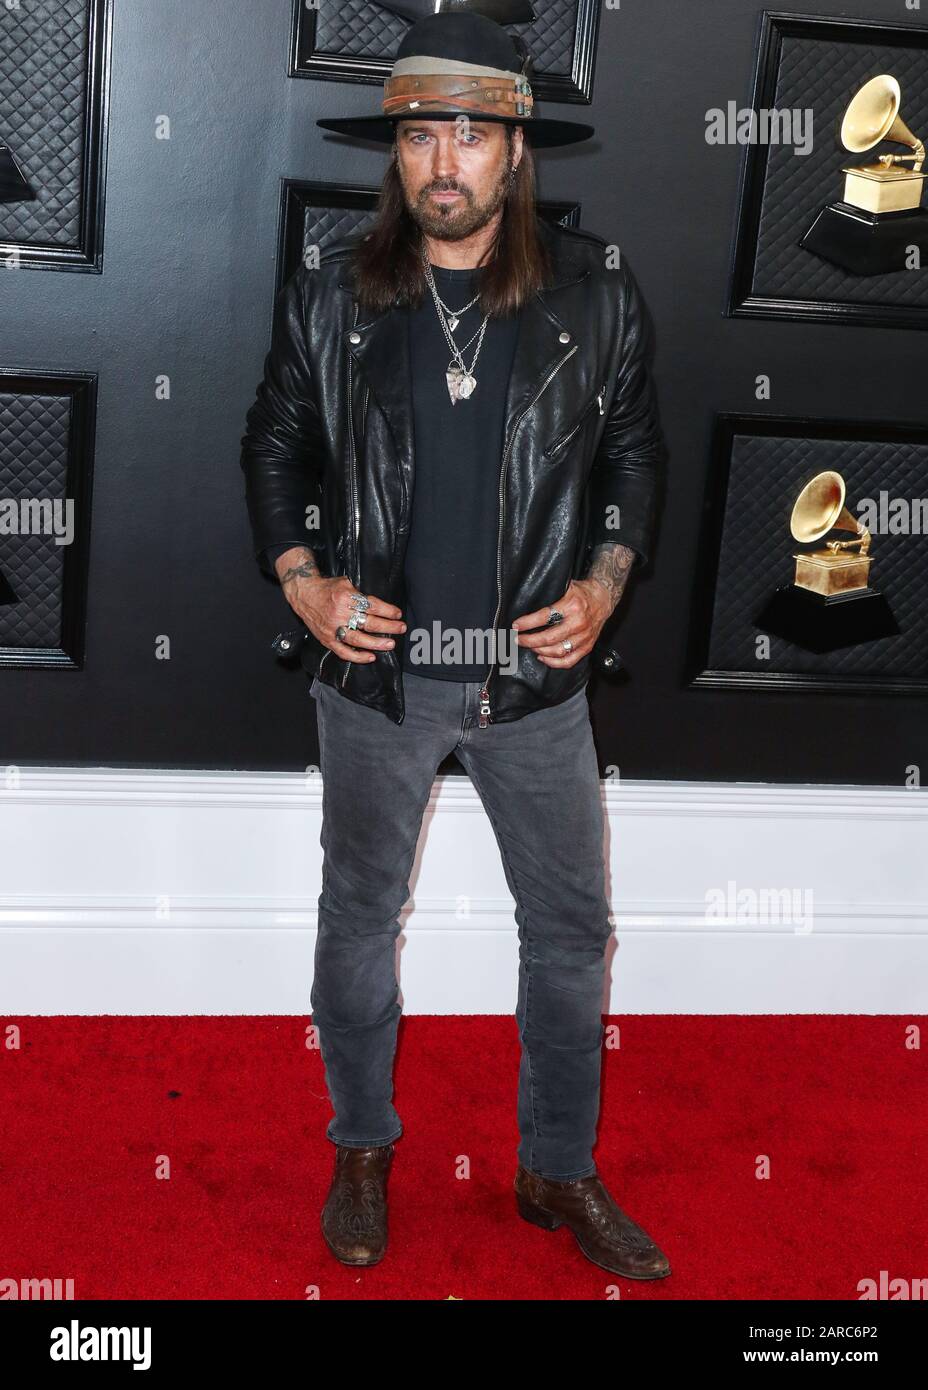 LOS ANGELES, CALIFORNIA, USA - JANUARY 26: Billy Ray Cyrus arrives at the 62nd Annual GRAMMY Awards held at Staples Center on January 26, 2020 in Los Angeles, California, United States. (Photo by Xavier Collin/Image Press Agency) Stock Photo